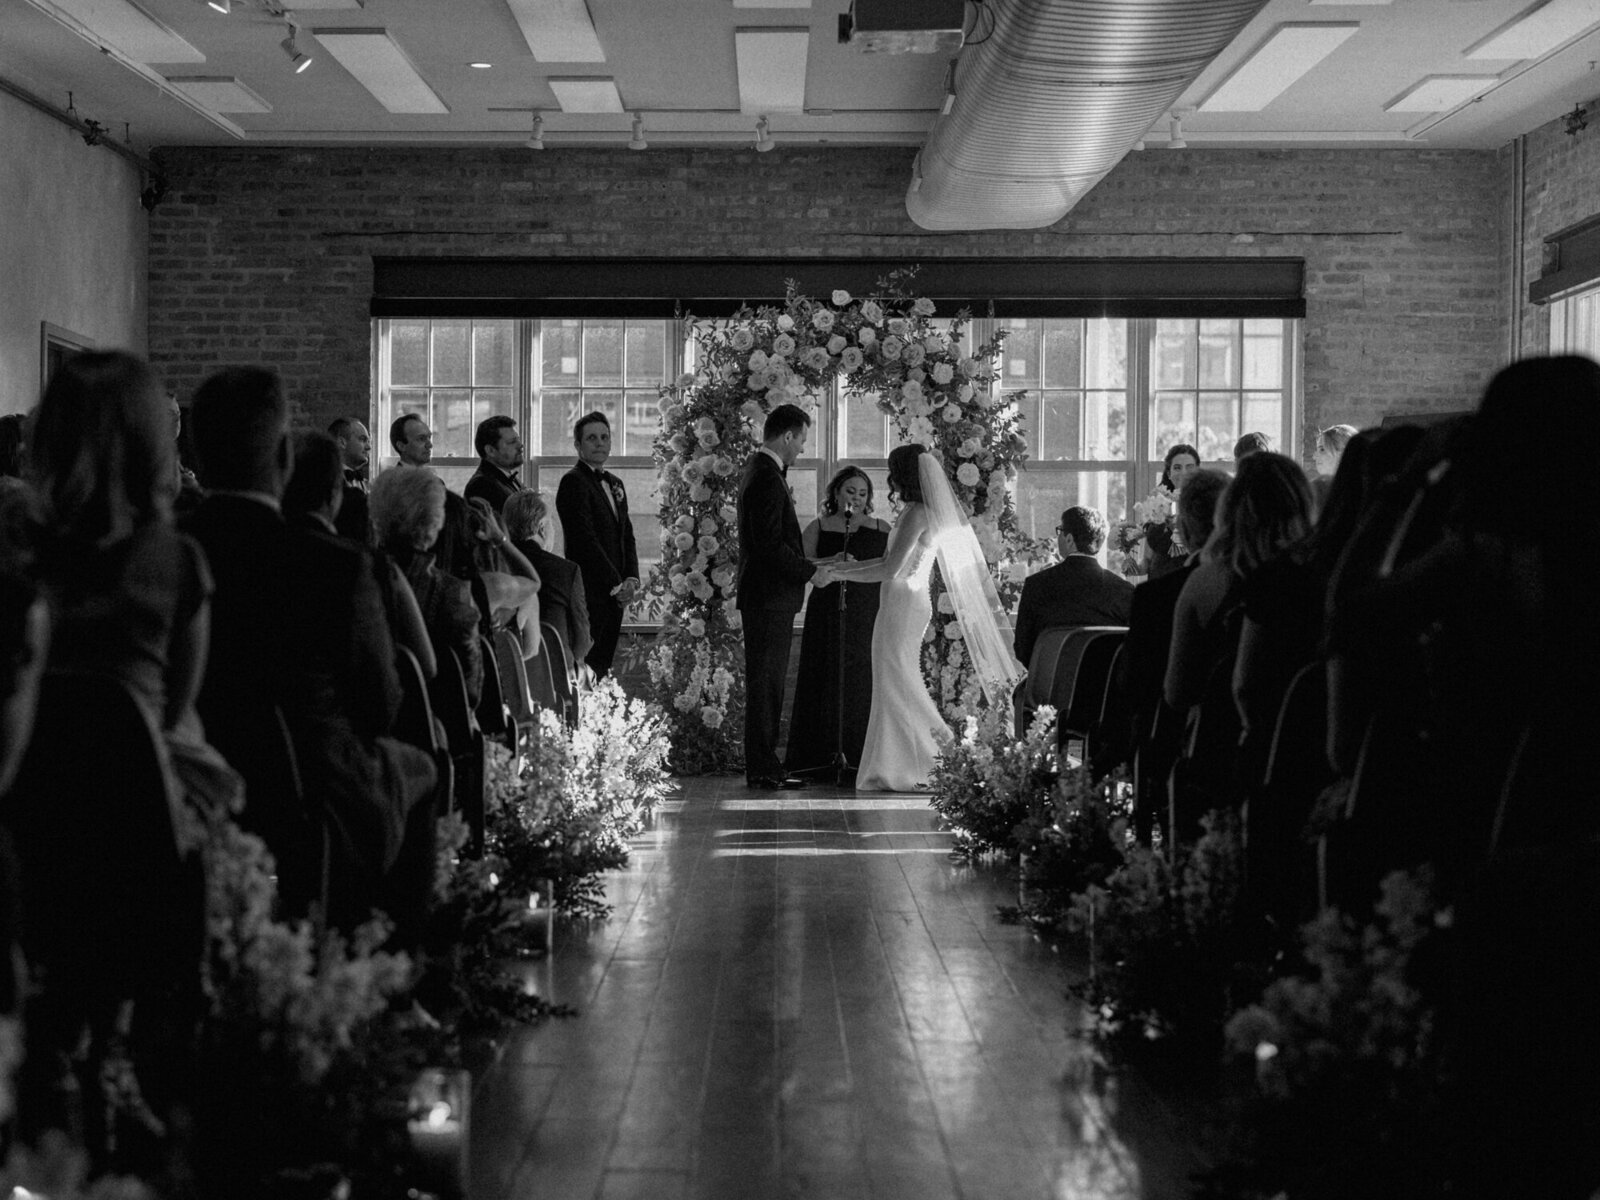 A black and white ceremony photo taken at Morgan's on Fulton in Chicago's West Loop neighborhood